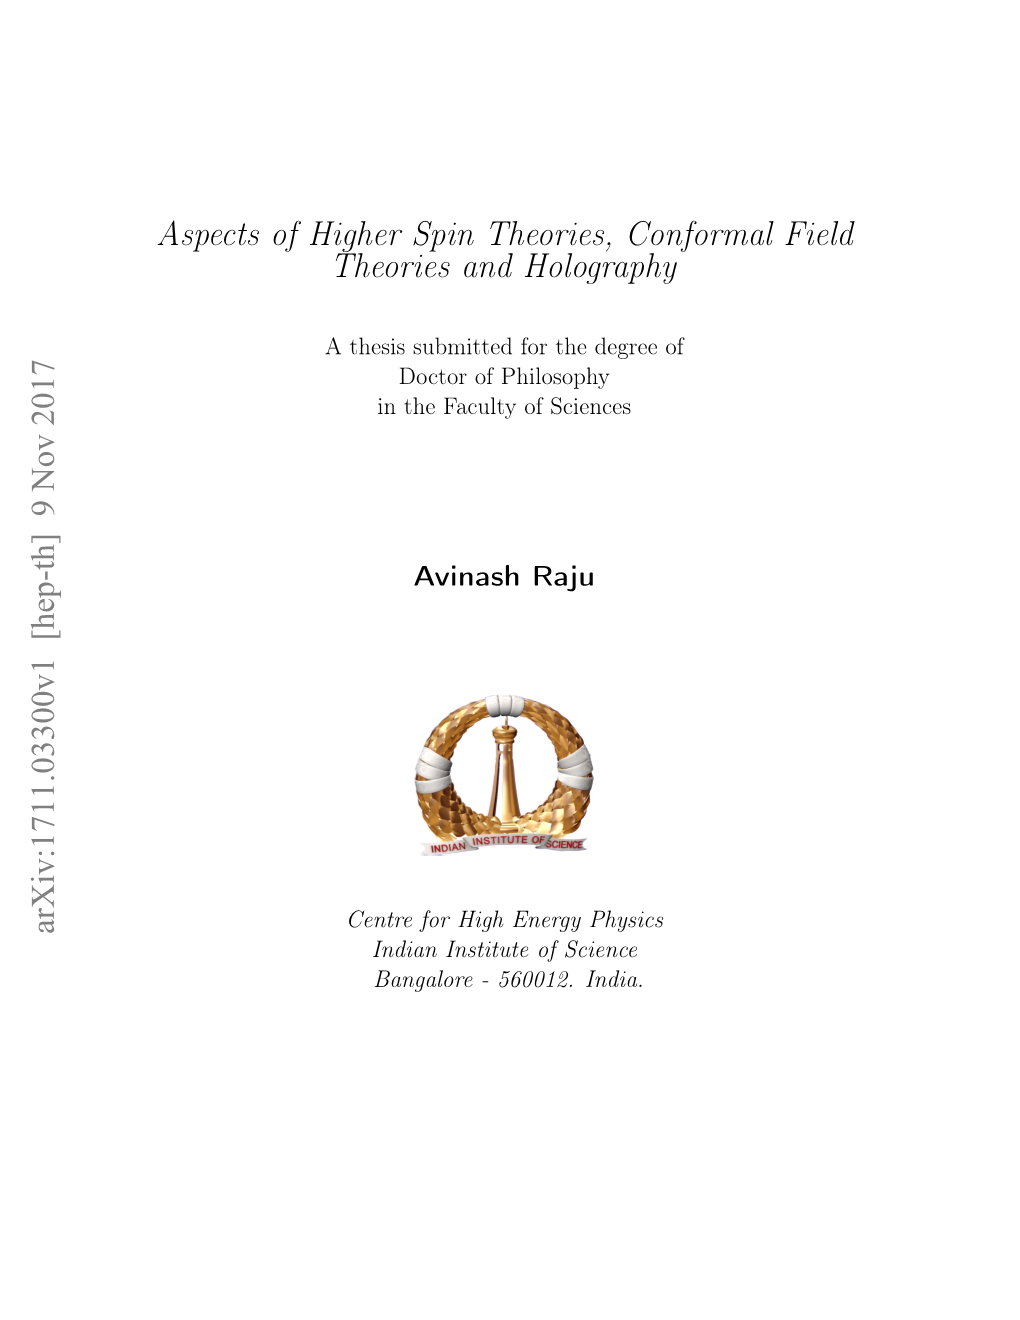 Aspects of Higher Spin Theories, Conformal Field Theories and Holography